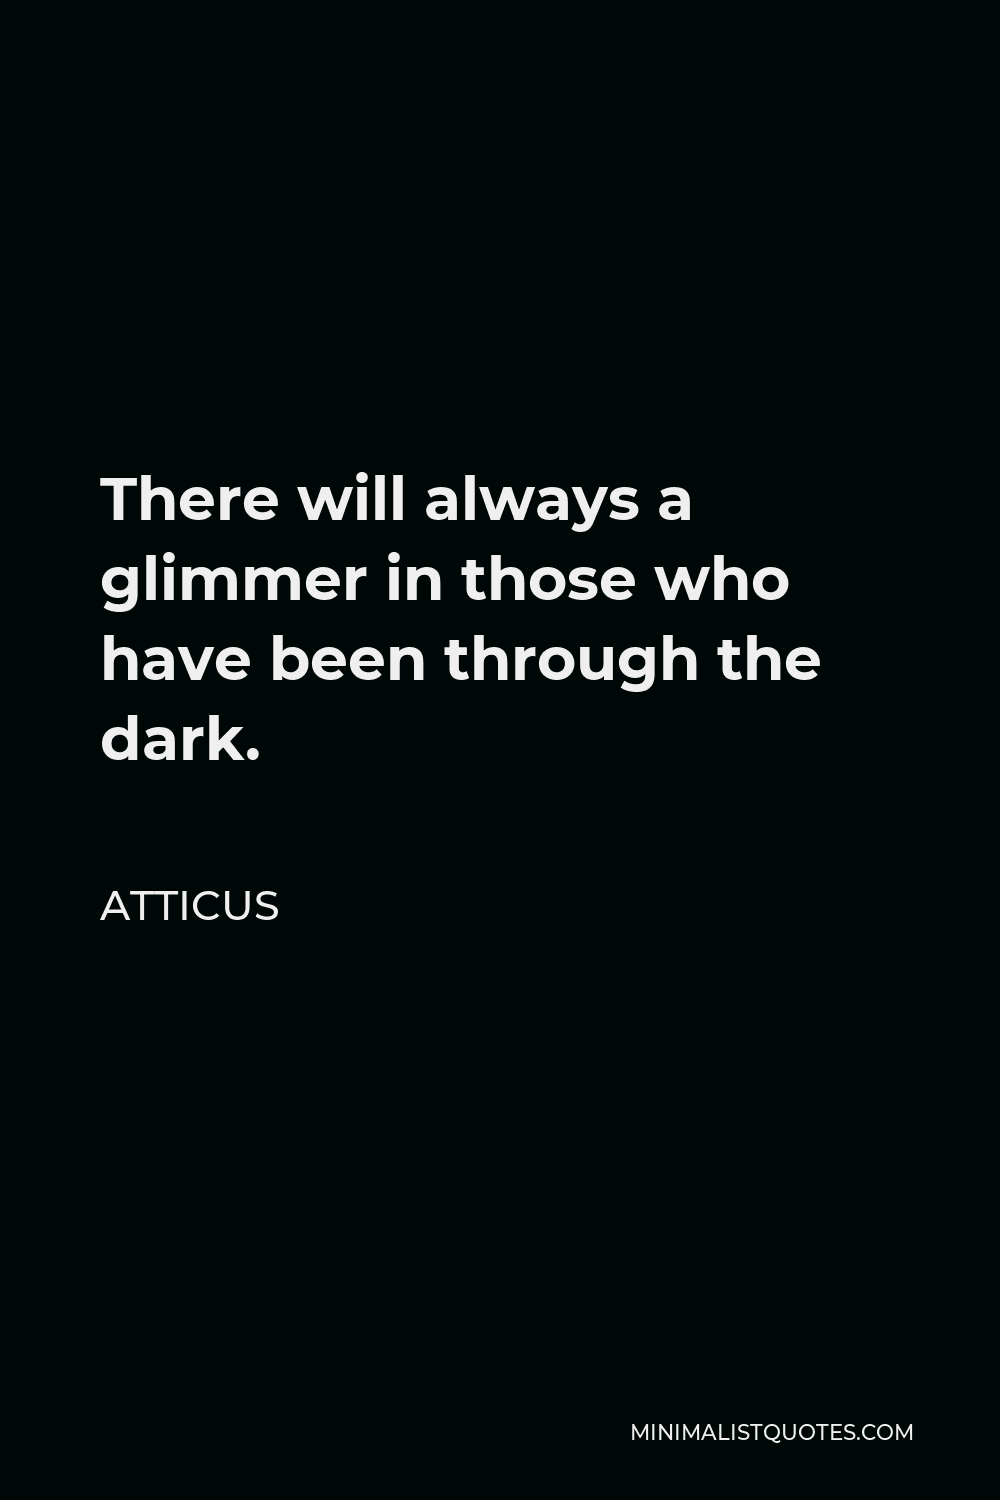 Atticus Quote - There will always a glimmer in those who have been through the dark.